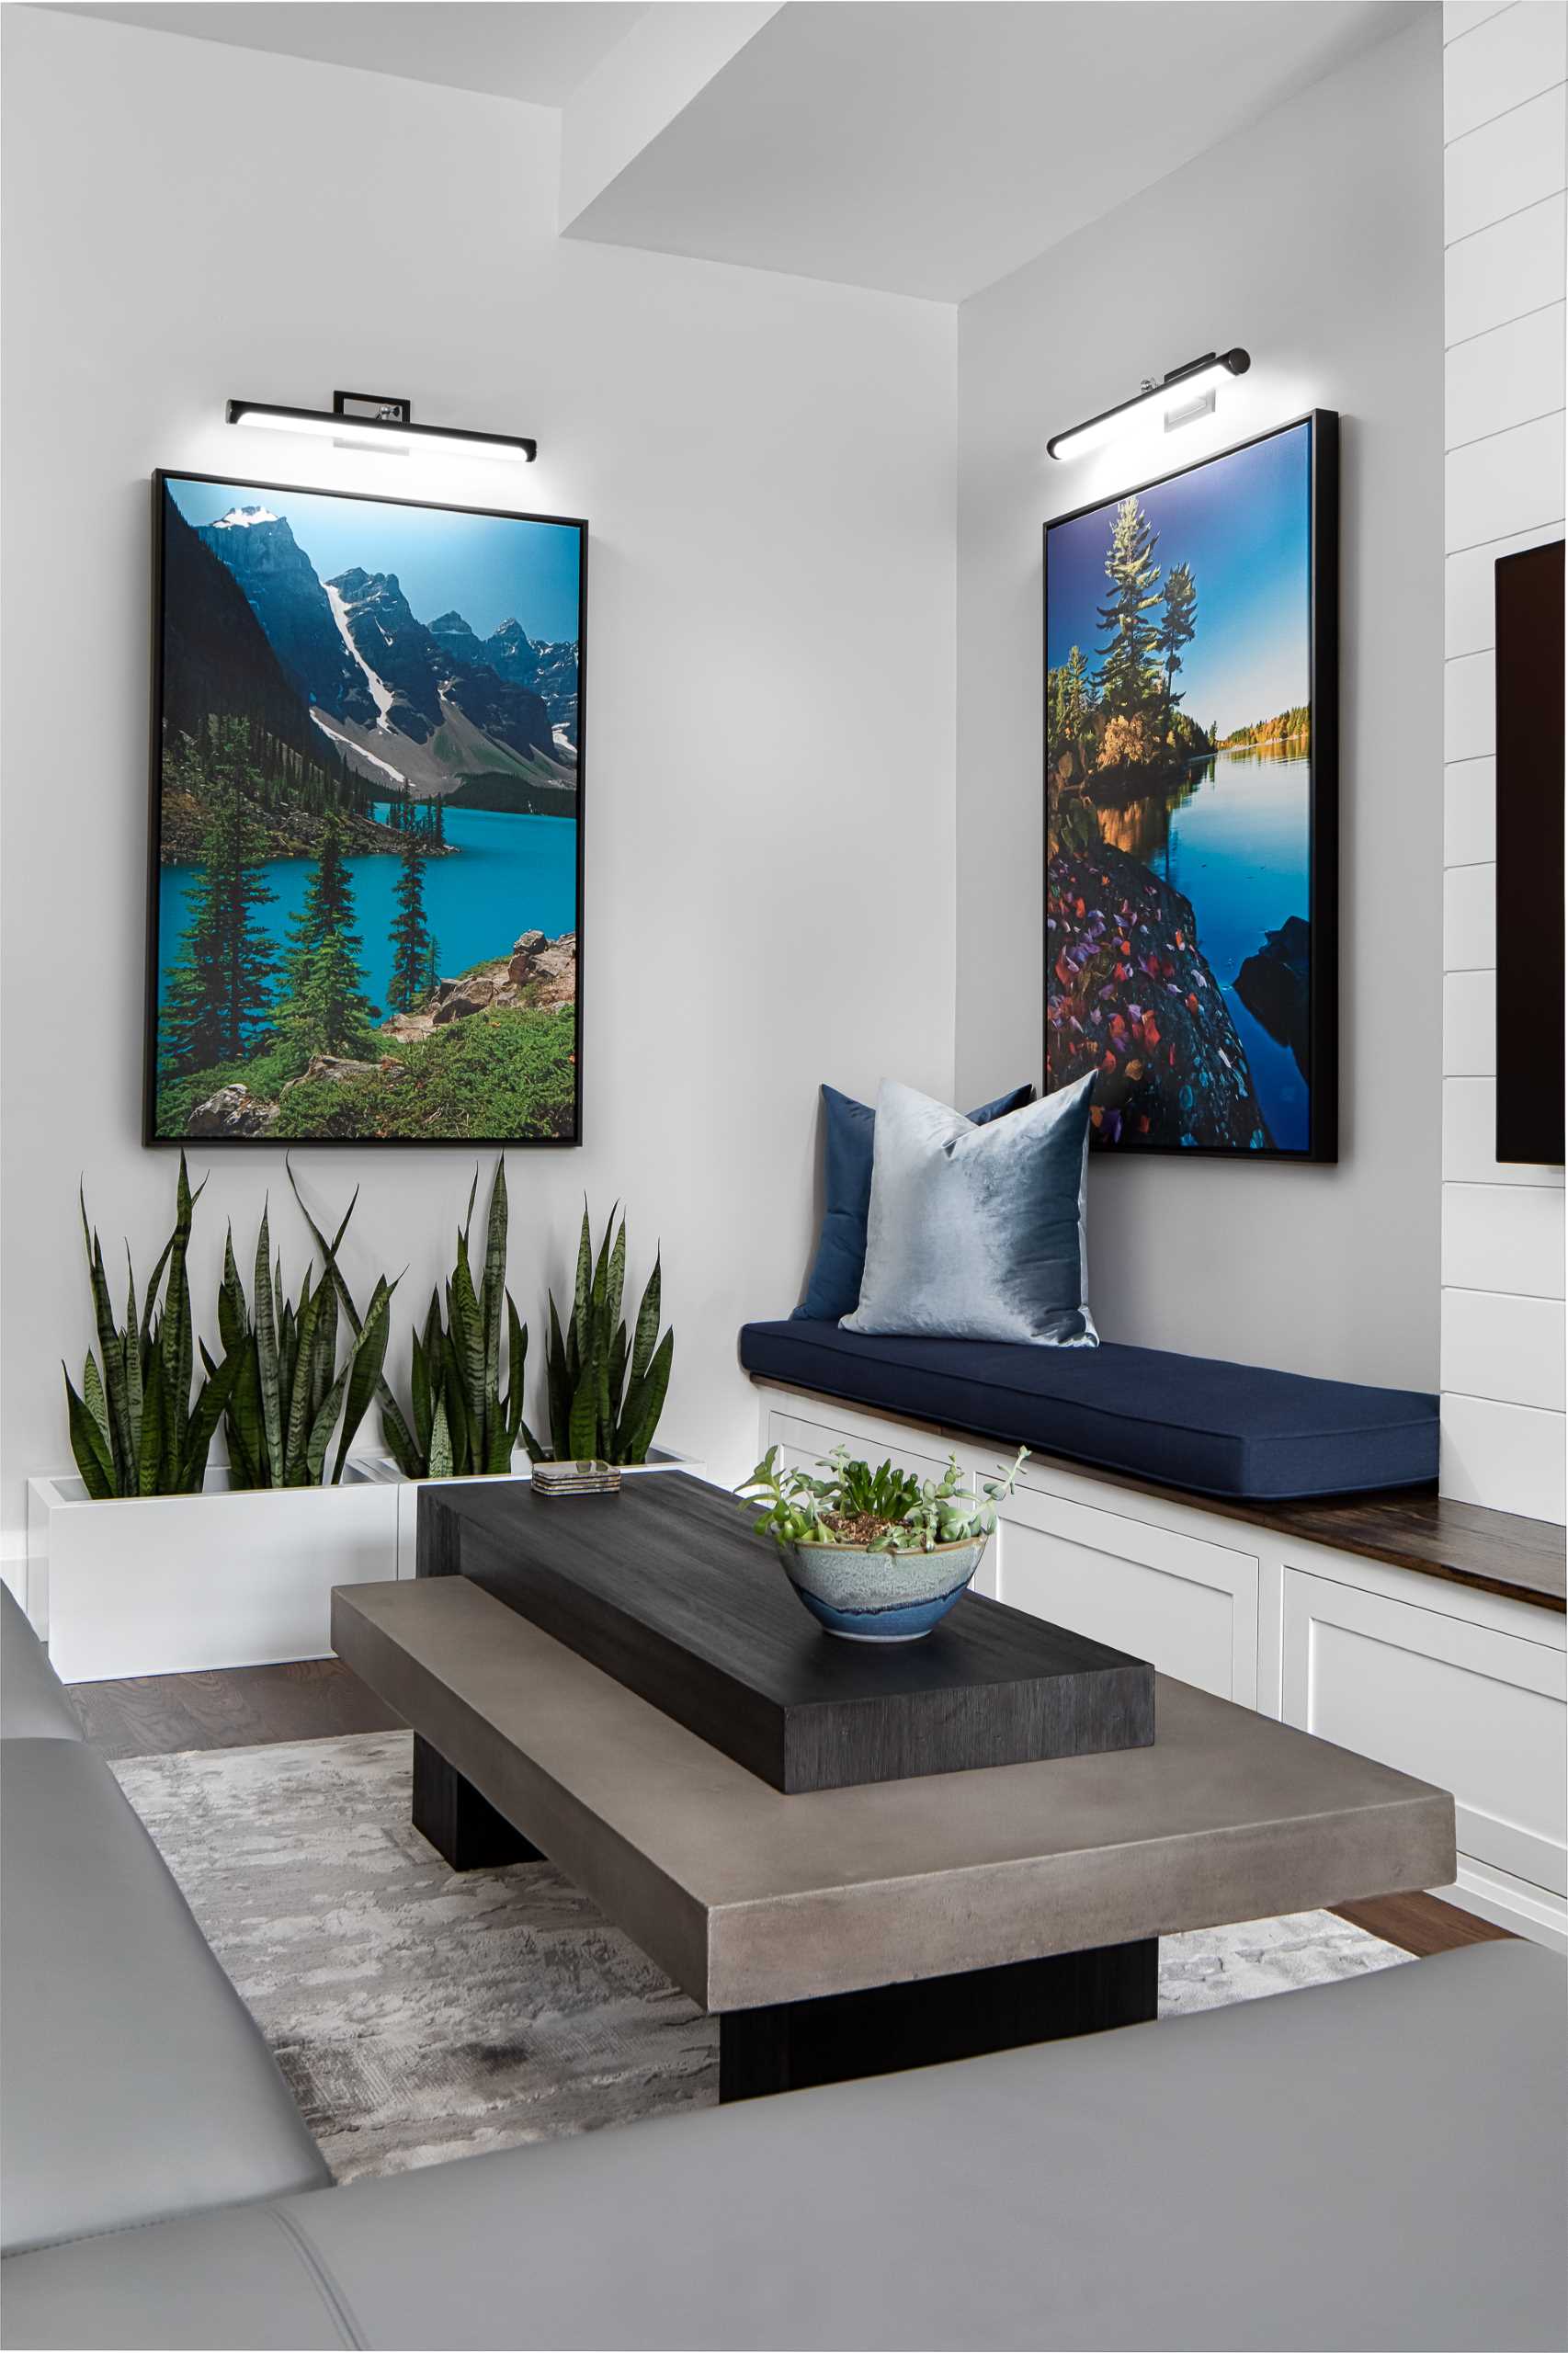 A modern living room with large art prints, and built-in benches that include hidden storage.